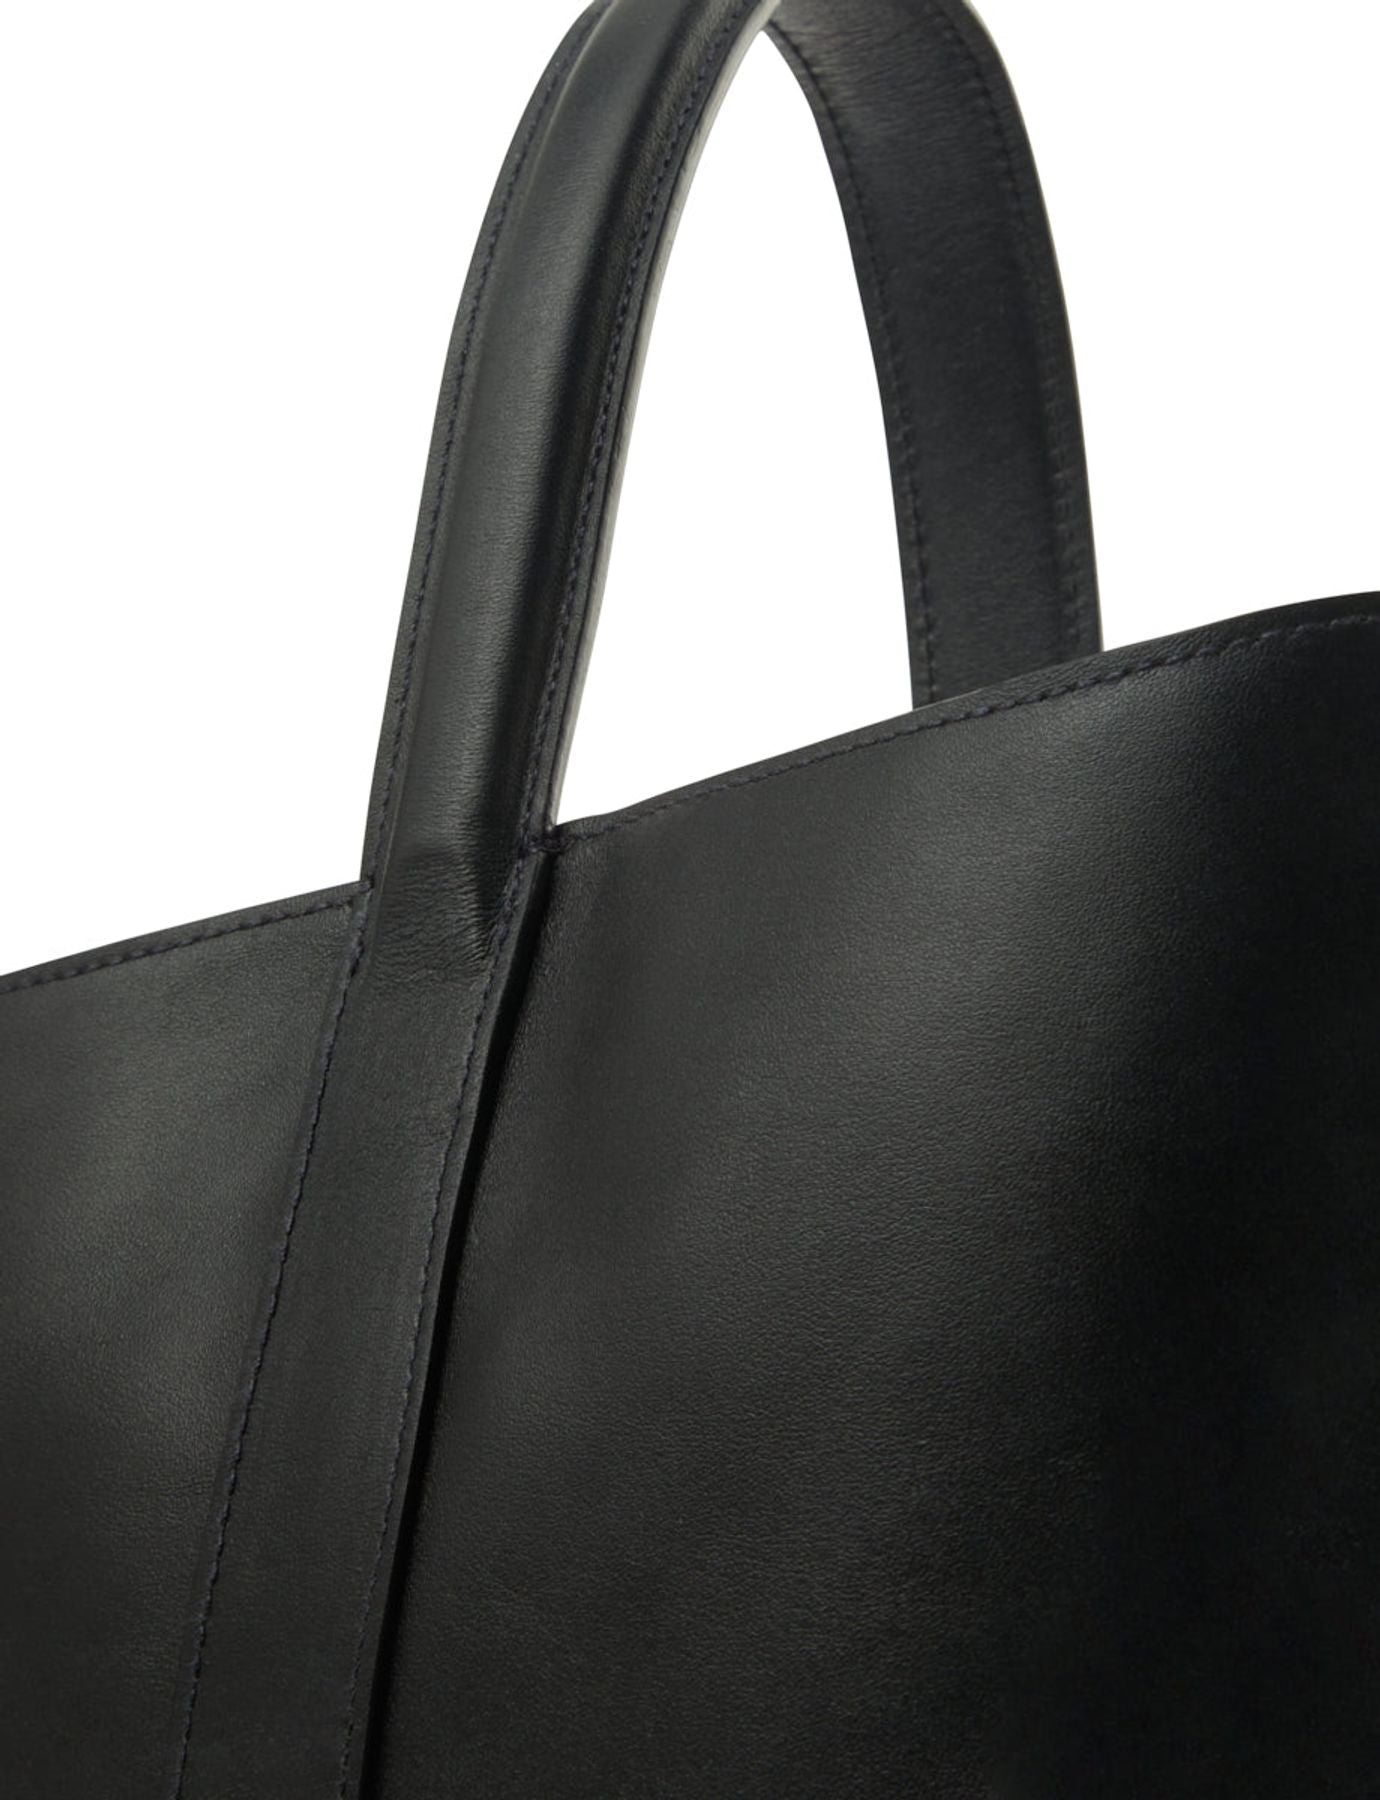 bag-leonore-size-in-leather-black